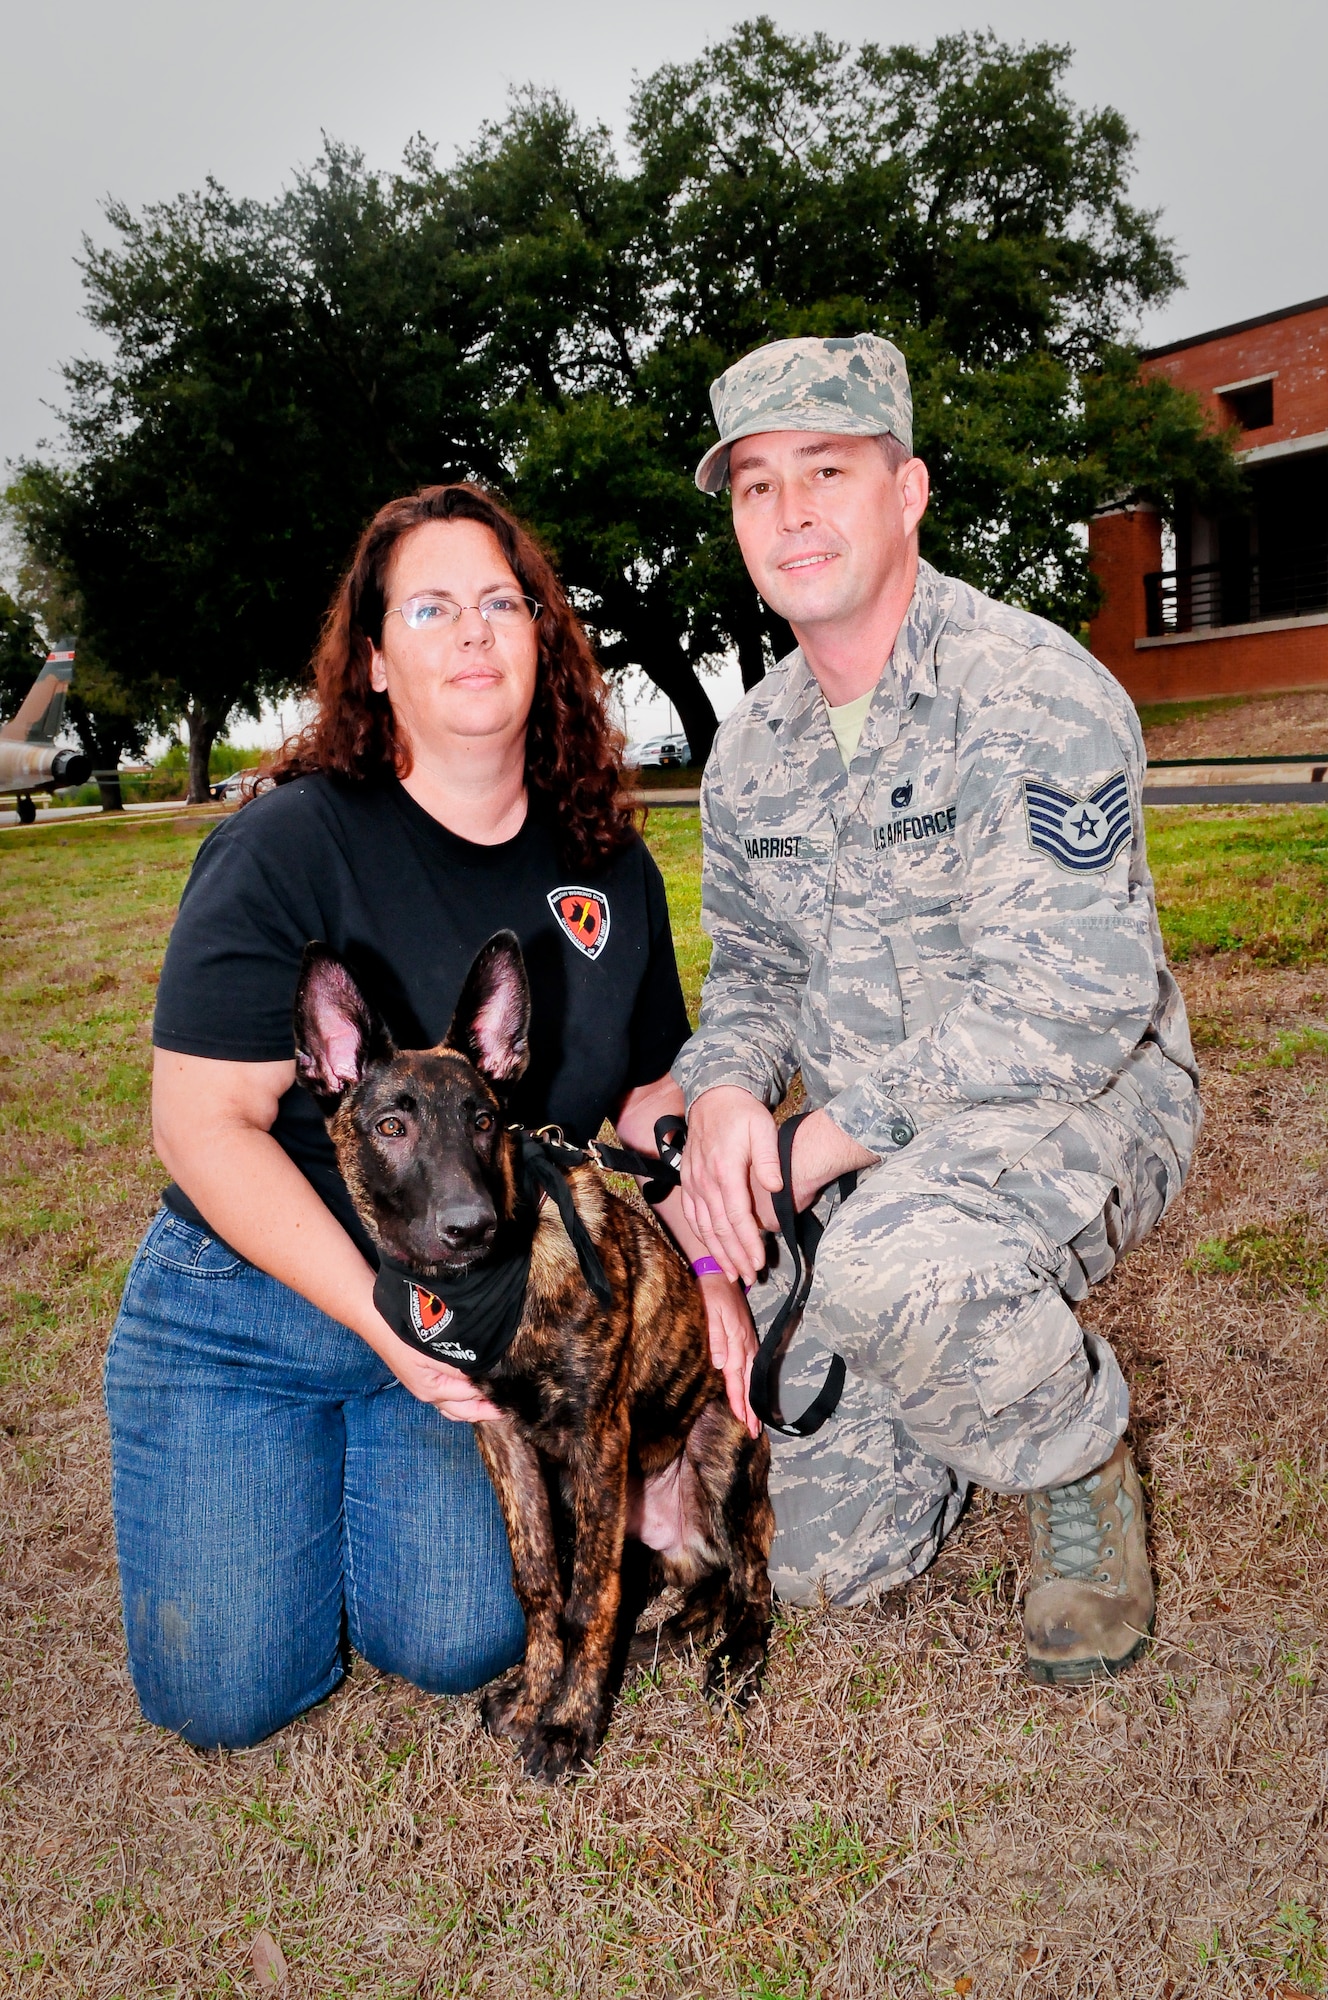 Tech. Sgt. Brandon M. Harrist (right), an aircraft electrical and environmental systems craftsman assigned to the 149th Maintenance Squadron, Texas Air National Guard, and his wife, Lora, pose with DDexter, a military working dog in training with the Department of Defense?s Military Working Dog Breeding Program at Joint Base San Antonio ? Lackland, Texas, Nov. 20, 2014. The 149th Maintenance Squadron is a subordinate unit of the 149th Fighter Wing. (U.S. Air National Guard photo by Senior Master Sgt. Miguel D. Arellano/Released)